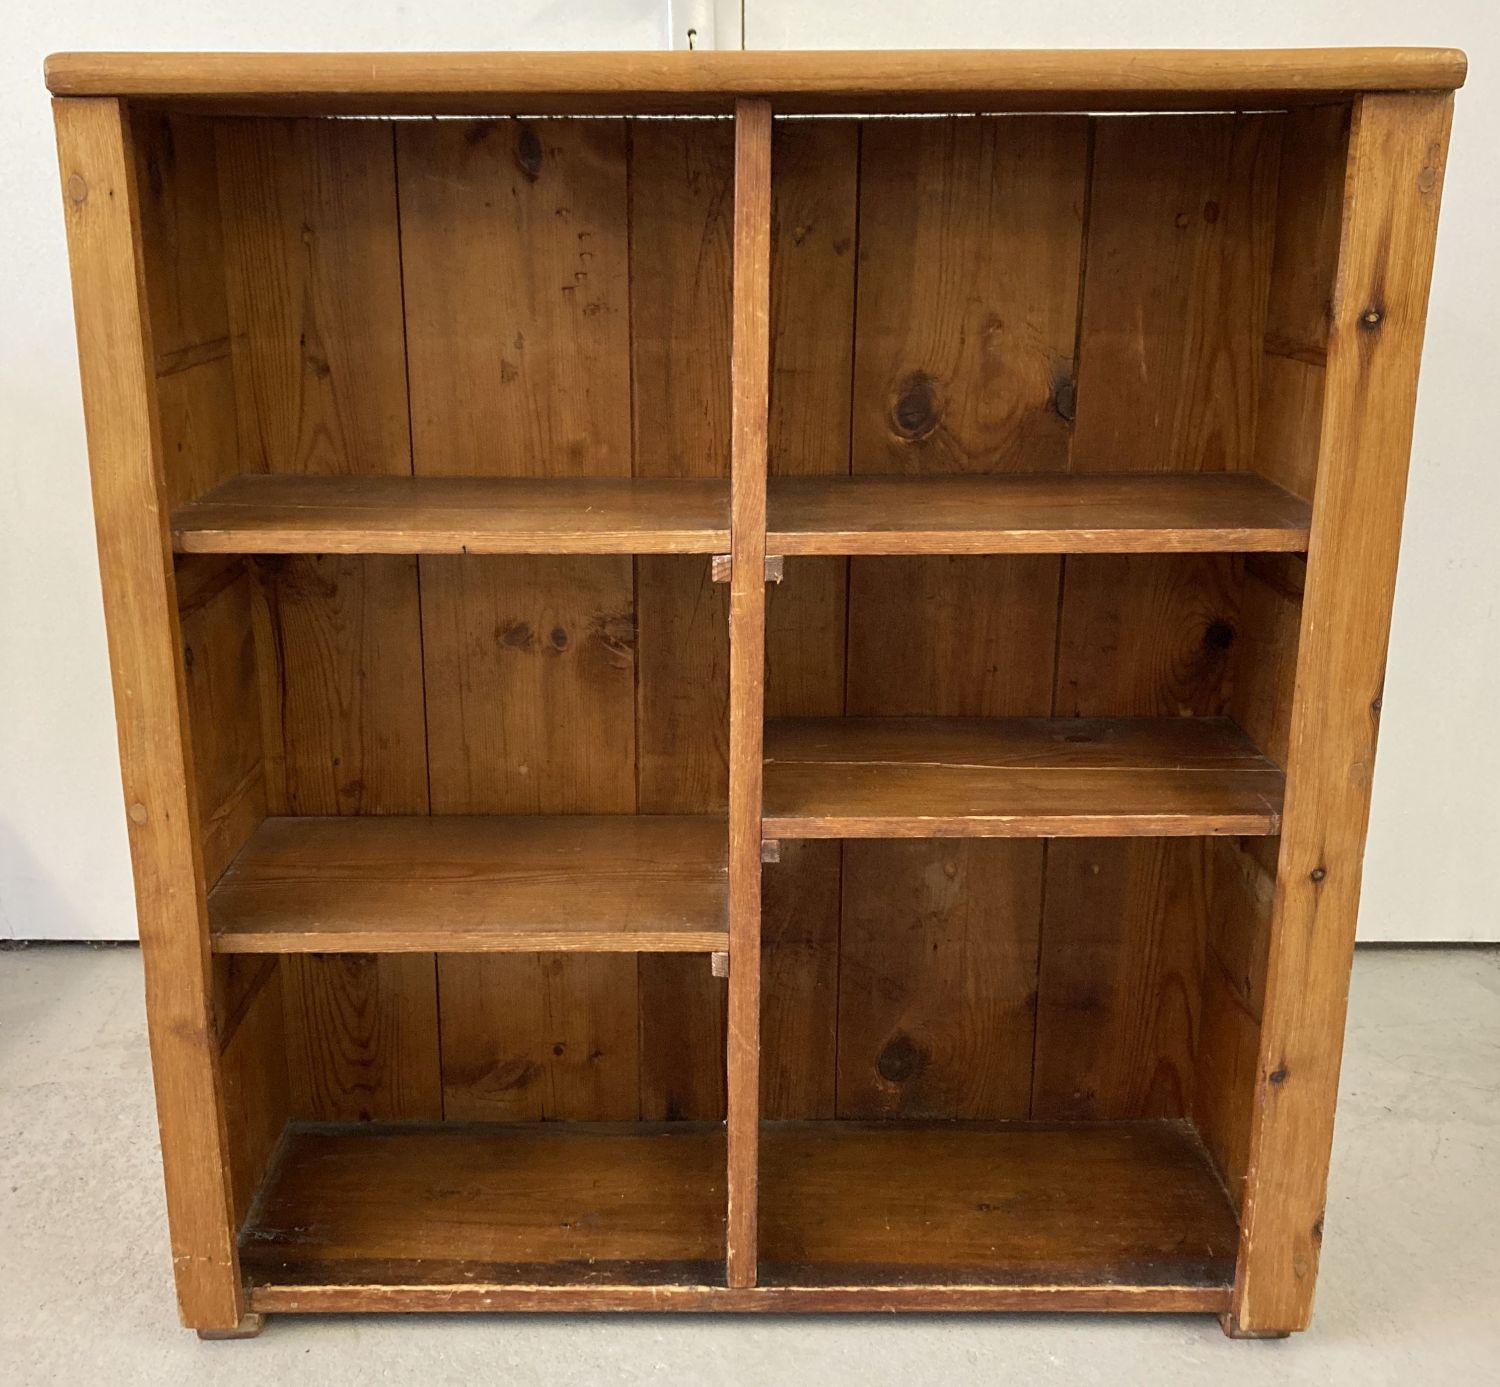 A pine storage unit/bookcase with 4 shelves at varying heights.